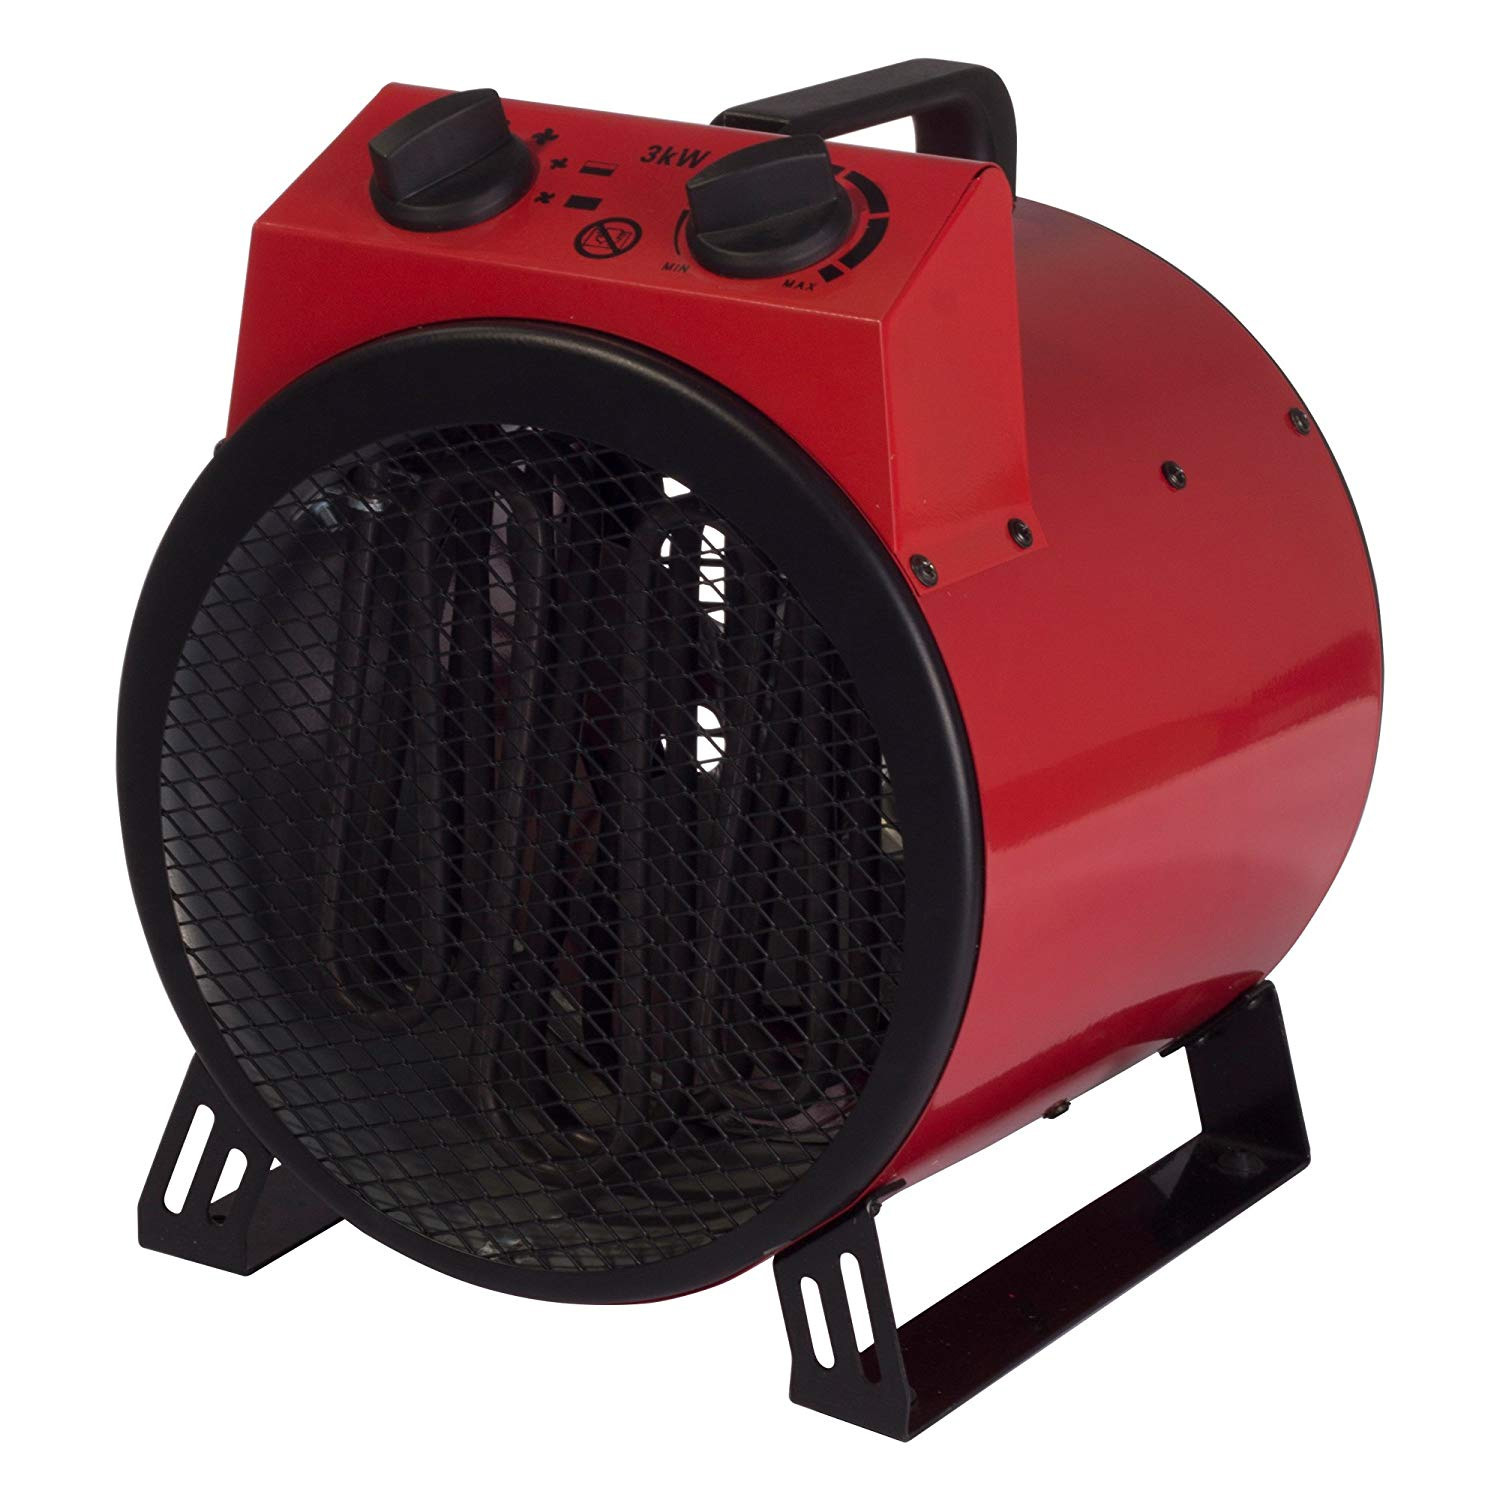 Igenix Ig9301 3kw Commercial Fan Heater intended for dimensions 1500 X 1500